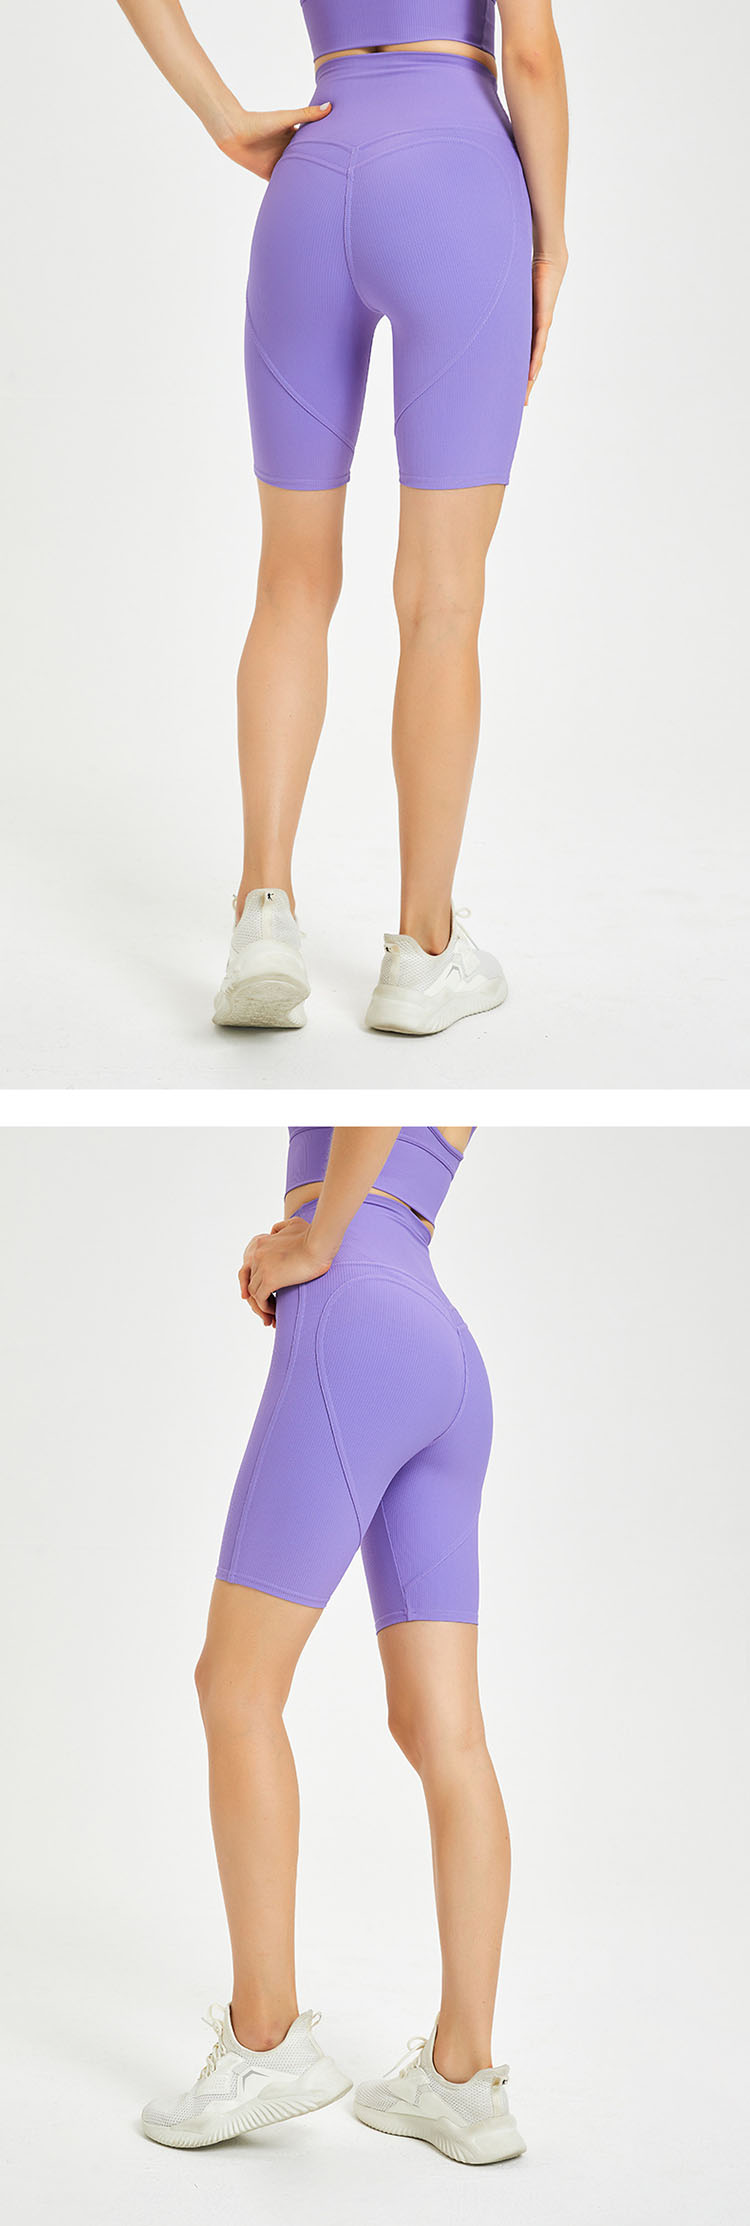 The hip-pack design tightens the buttocks muscles and visually lifts up to create a sexy buttocks